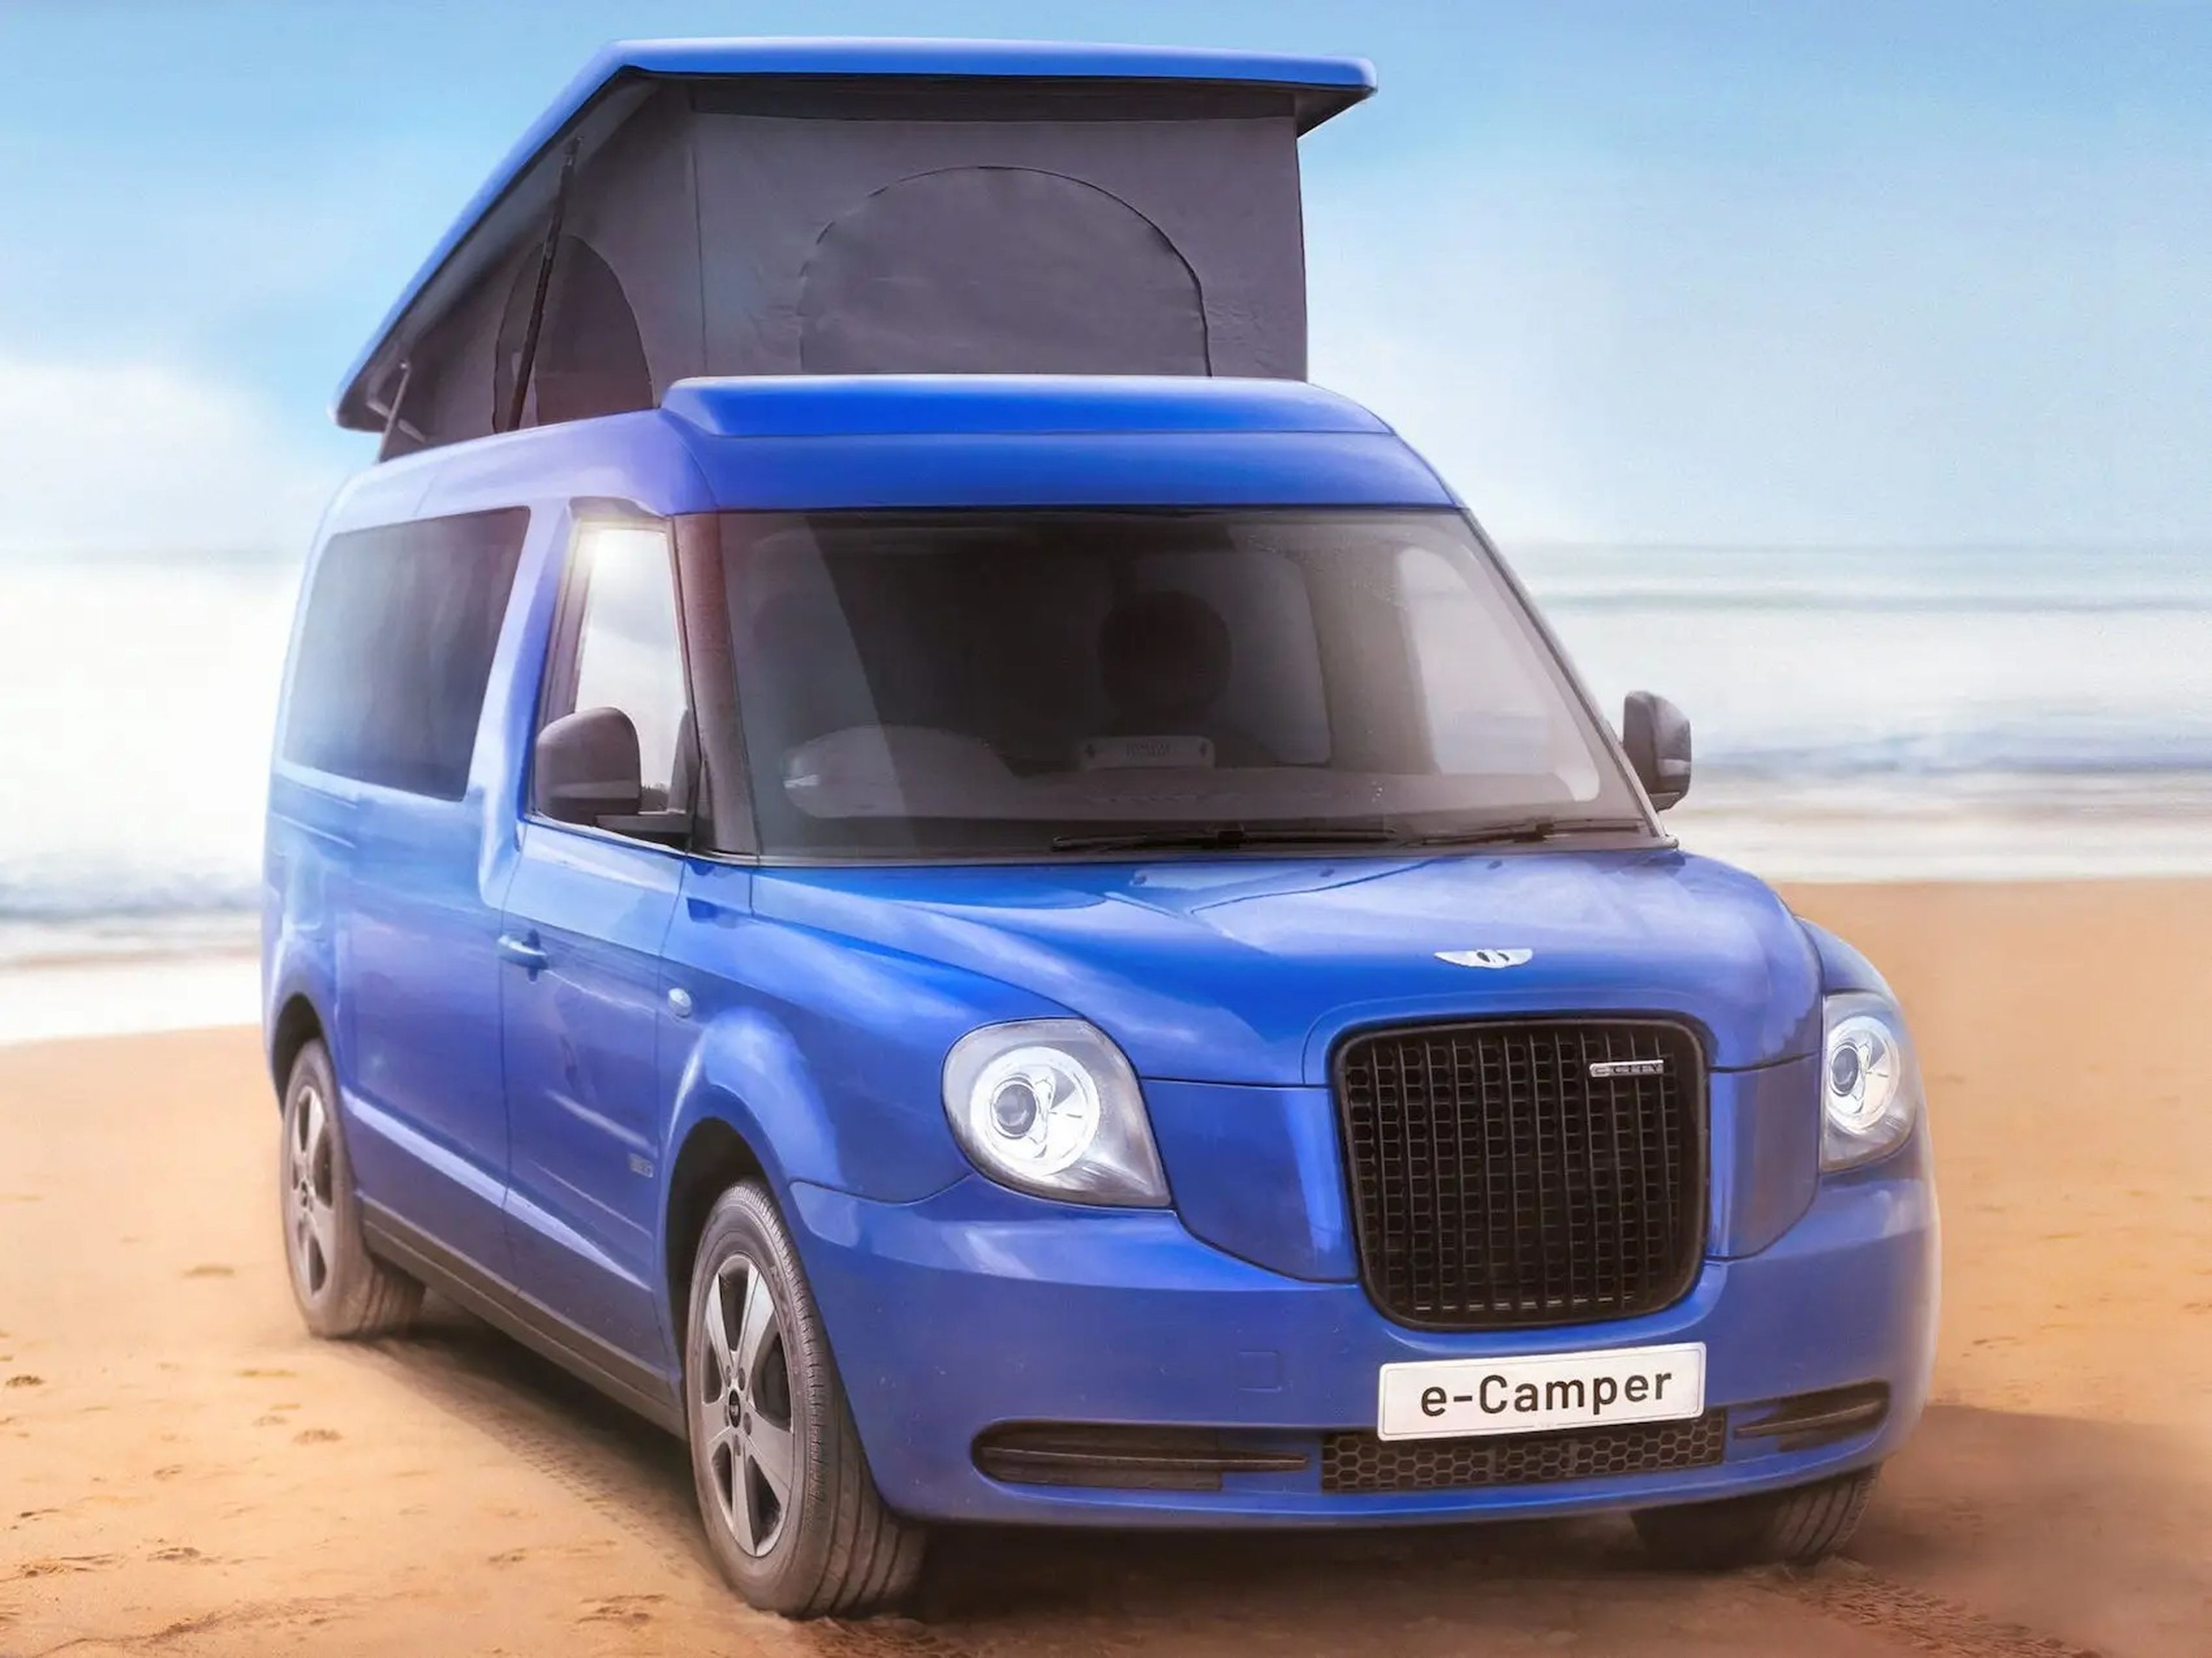 rendering of the e-Camper with its pop-top roof next to surfboarders.